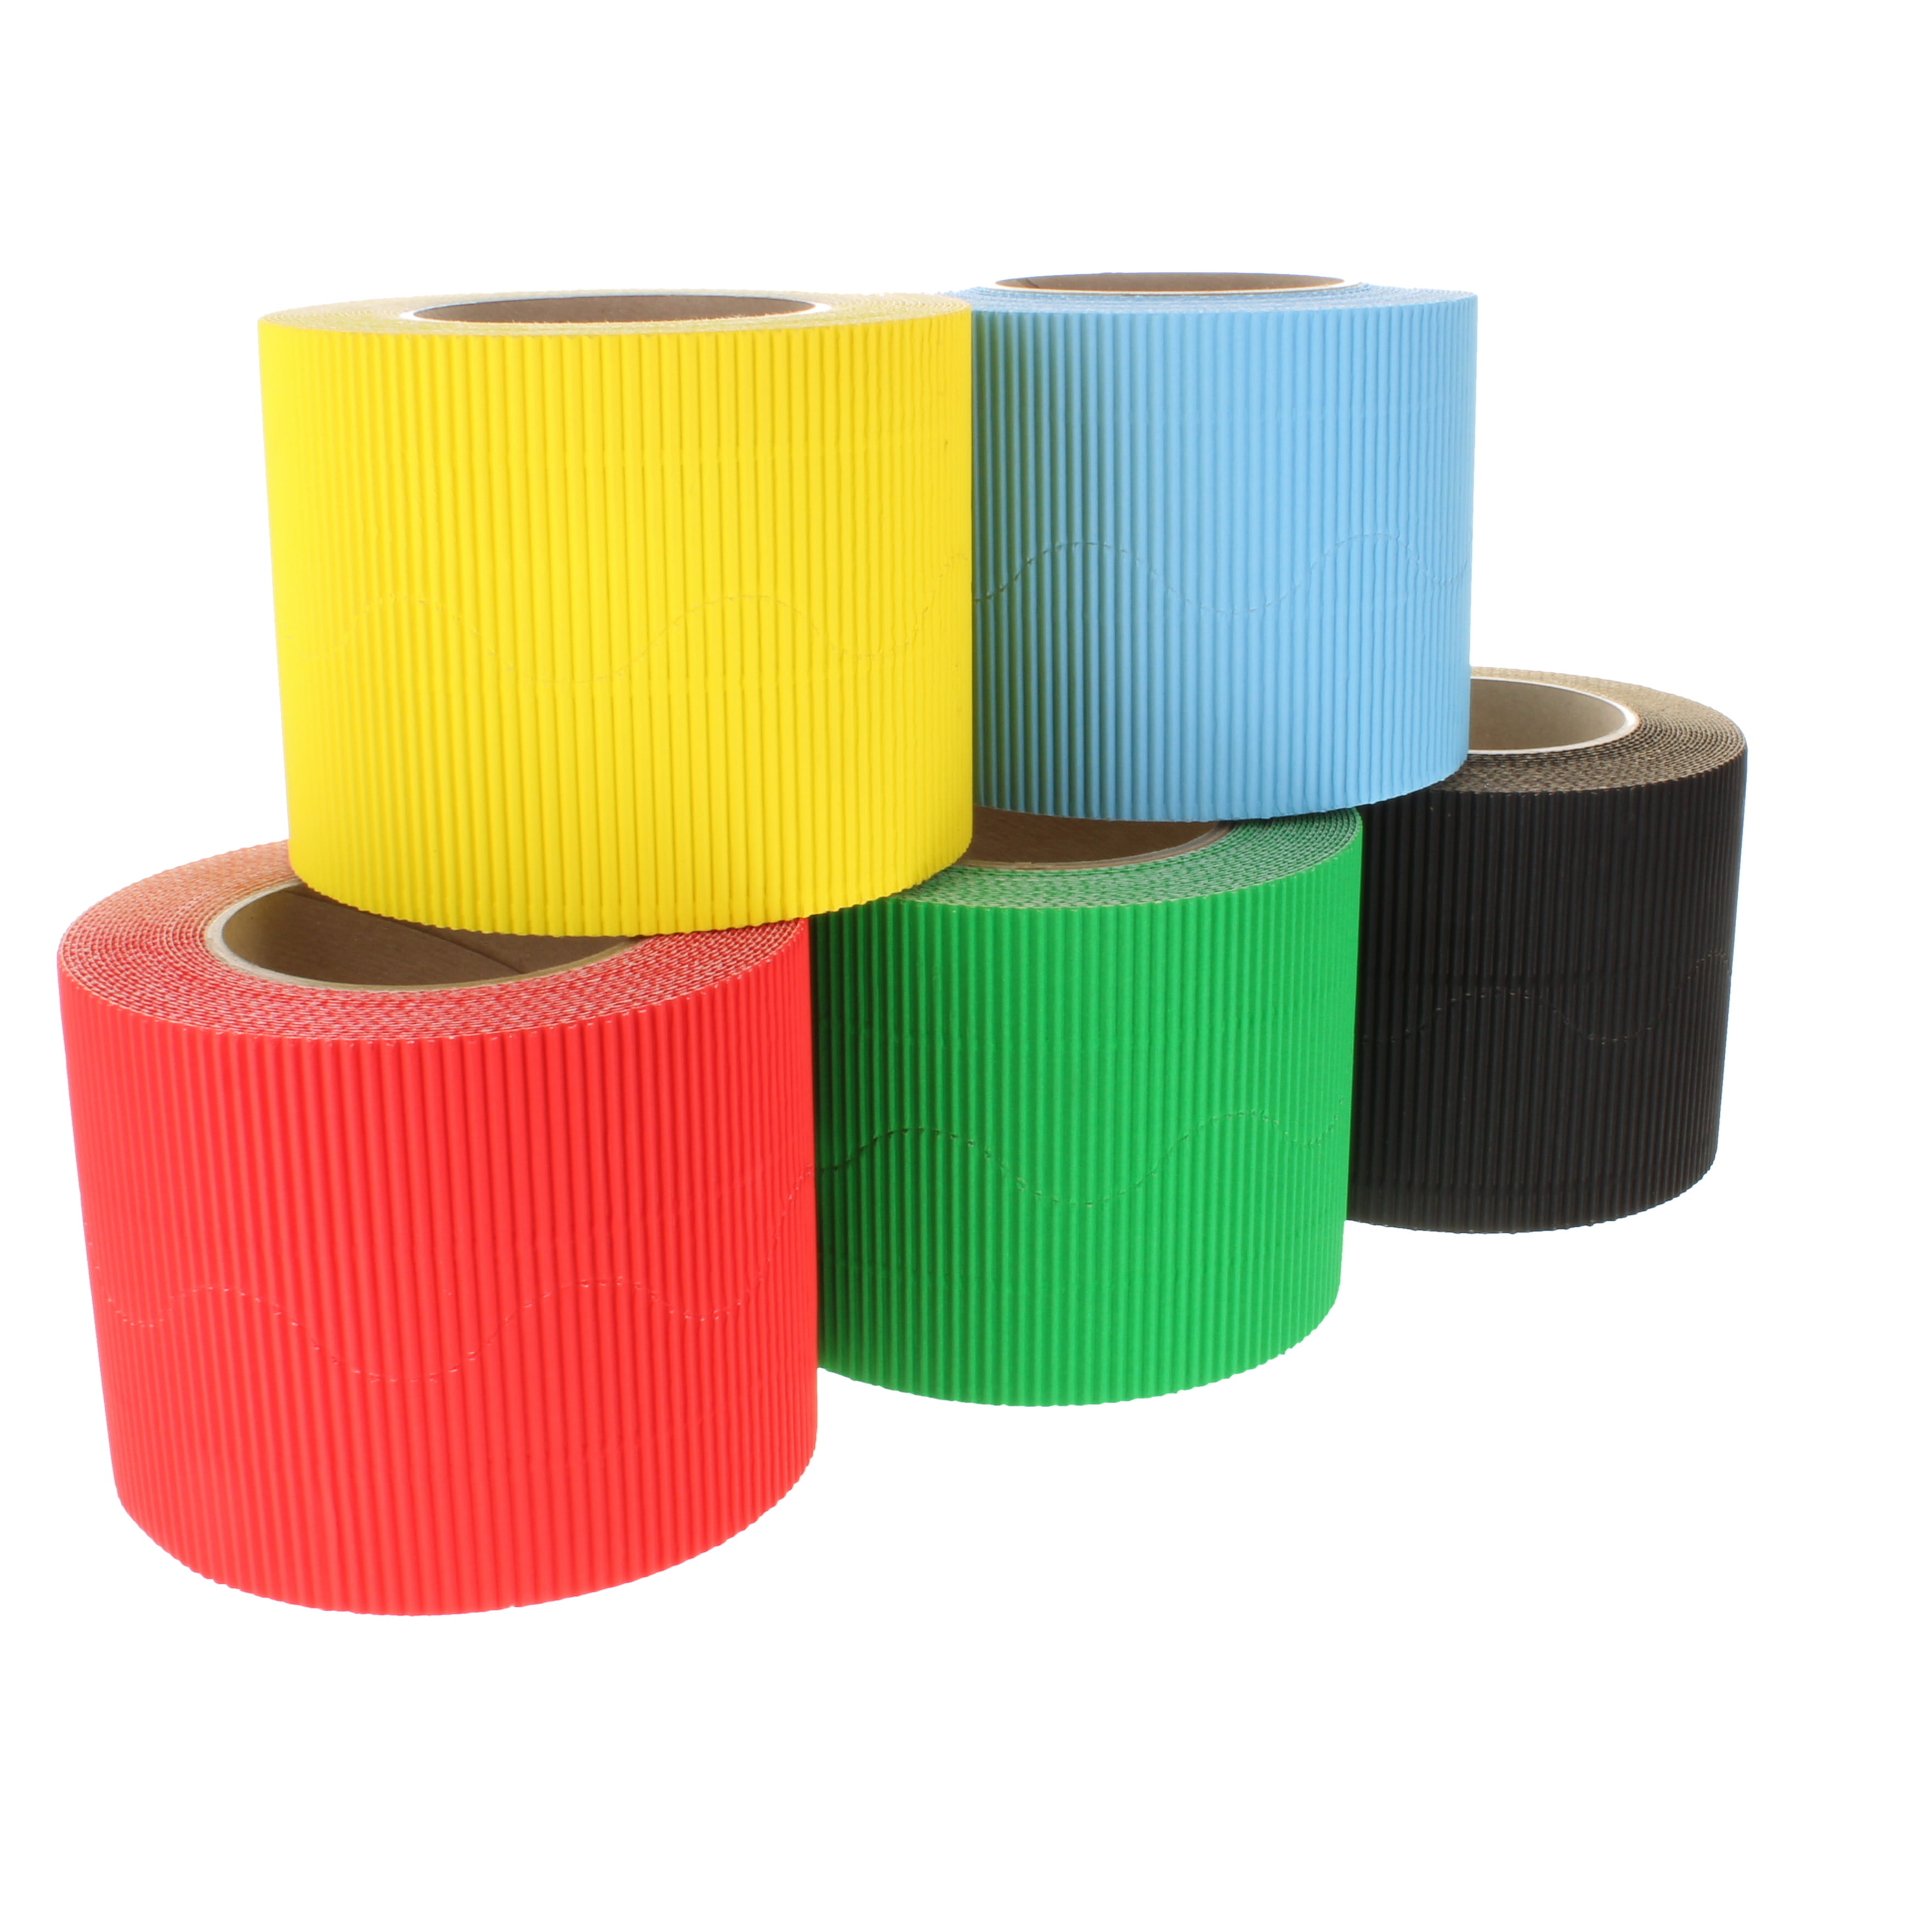 Border Rolls Corrugated Scalloped Assorted 57mm x 7.5m (check pack size) - pack of 10